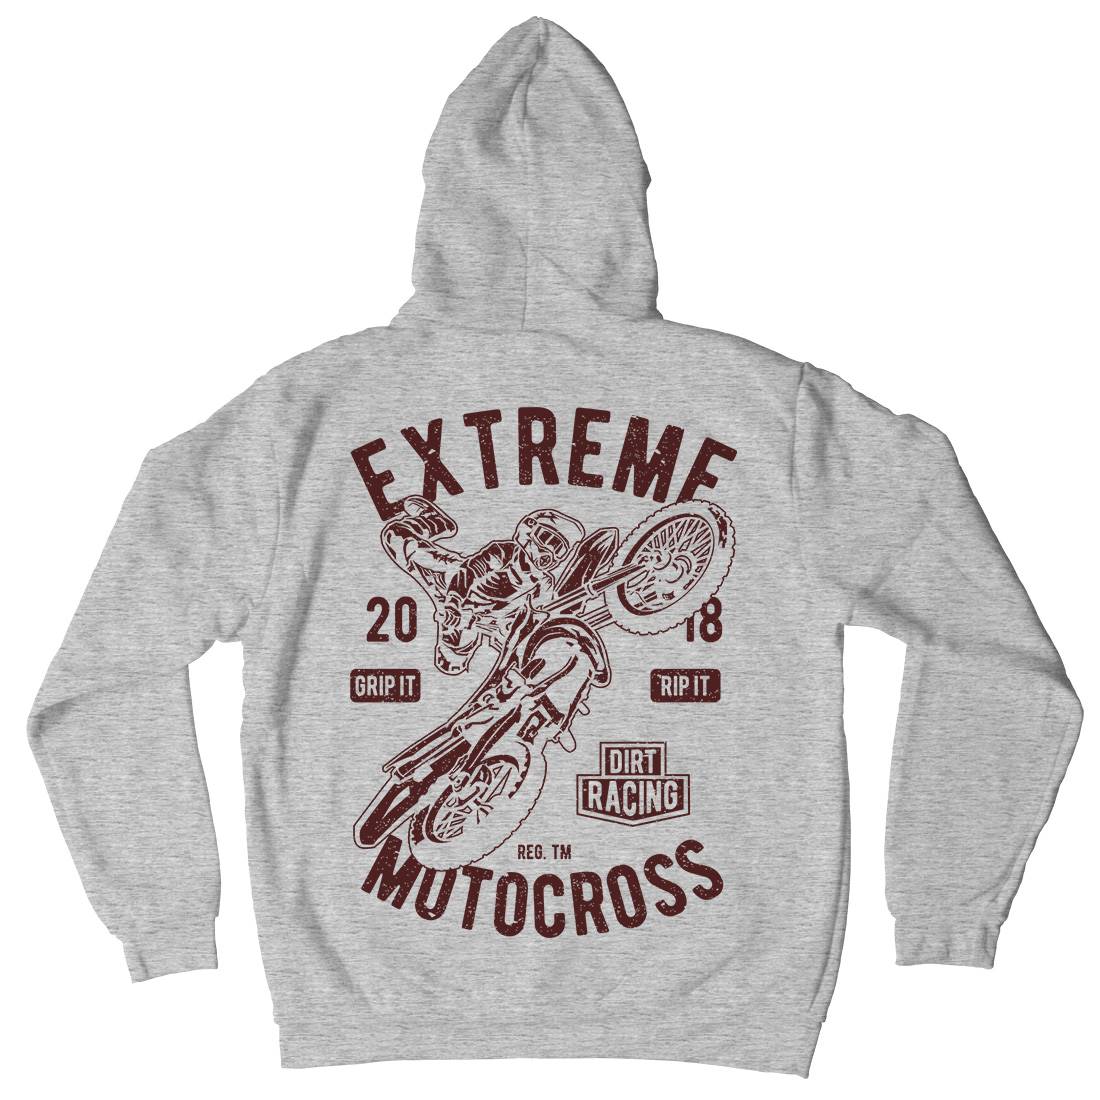 Extreme Motocross Mens Hoodie With Pocket Motorcycles A651